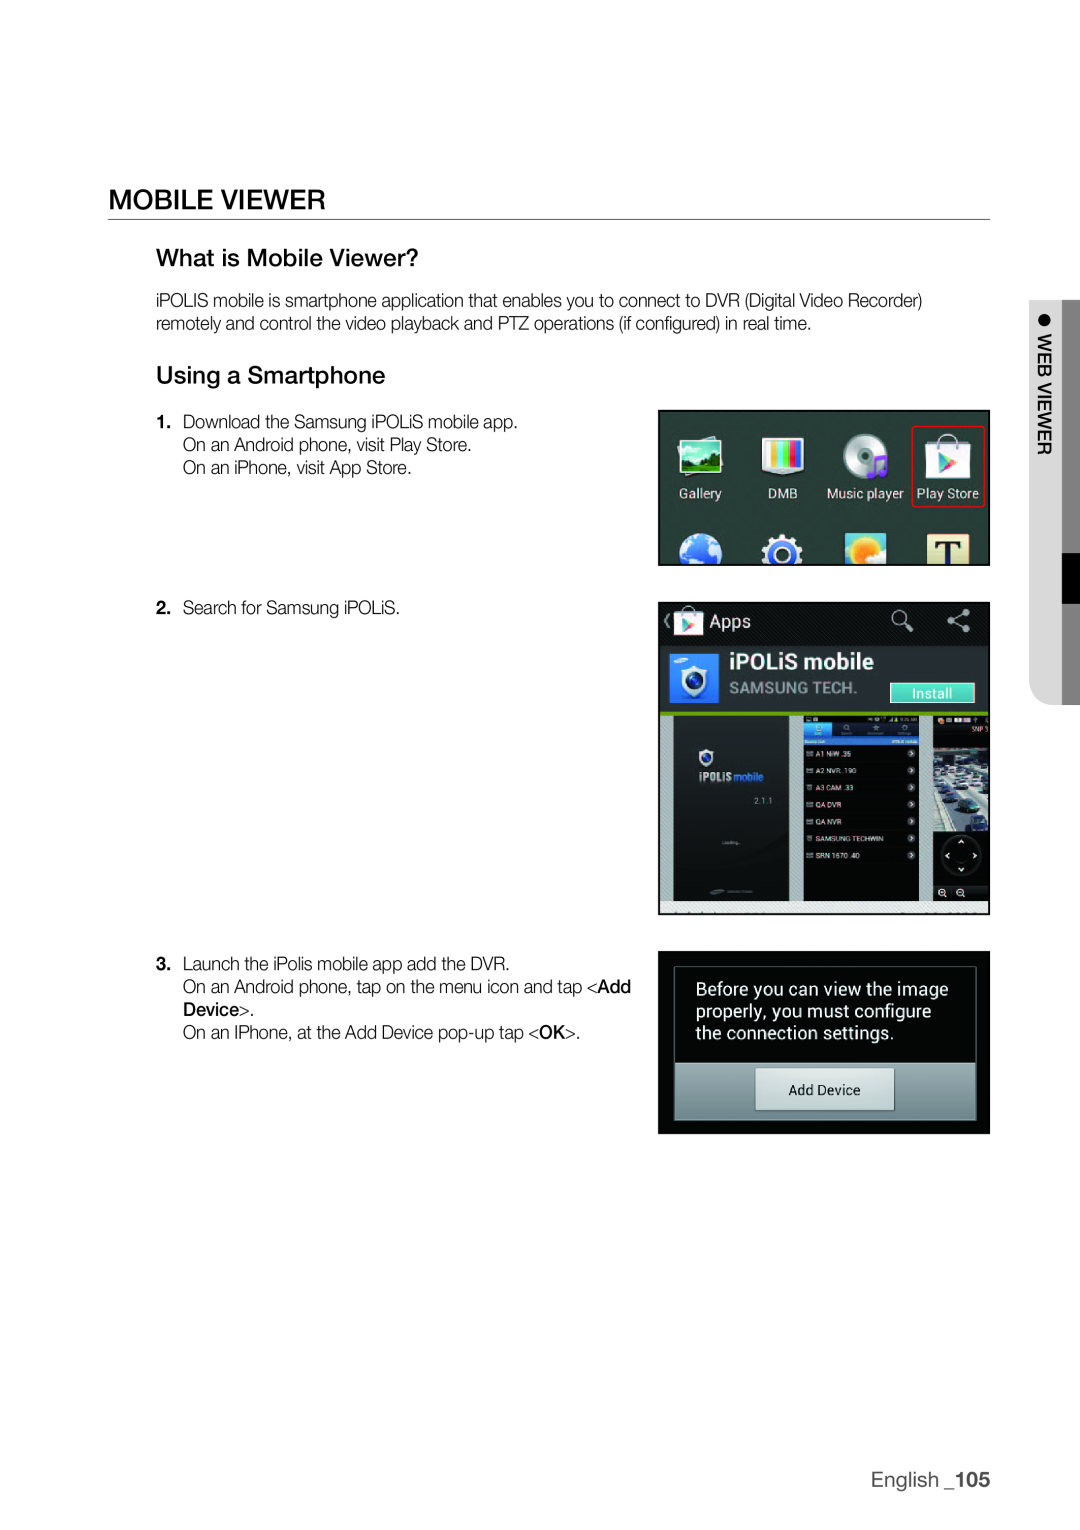 Samsung SDR3100 user manual What is Mobile Viewer?, Using a Smartphone, English _105 